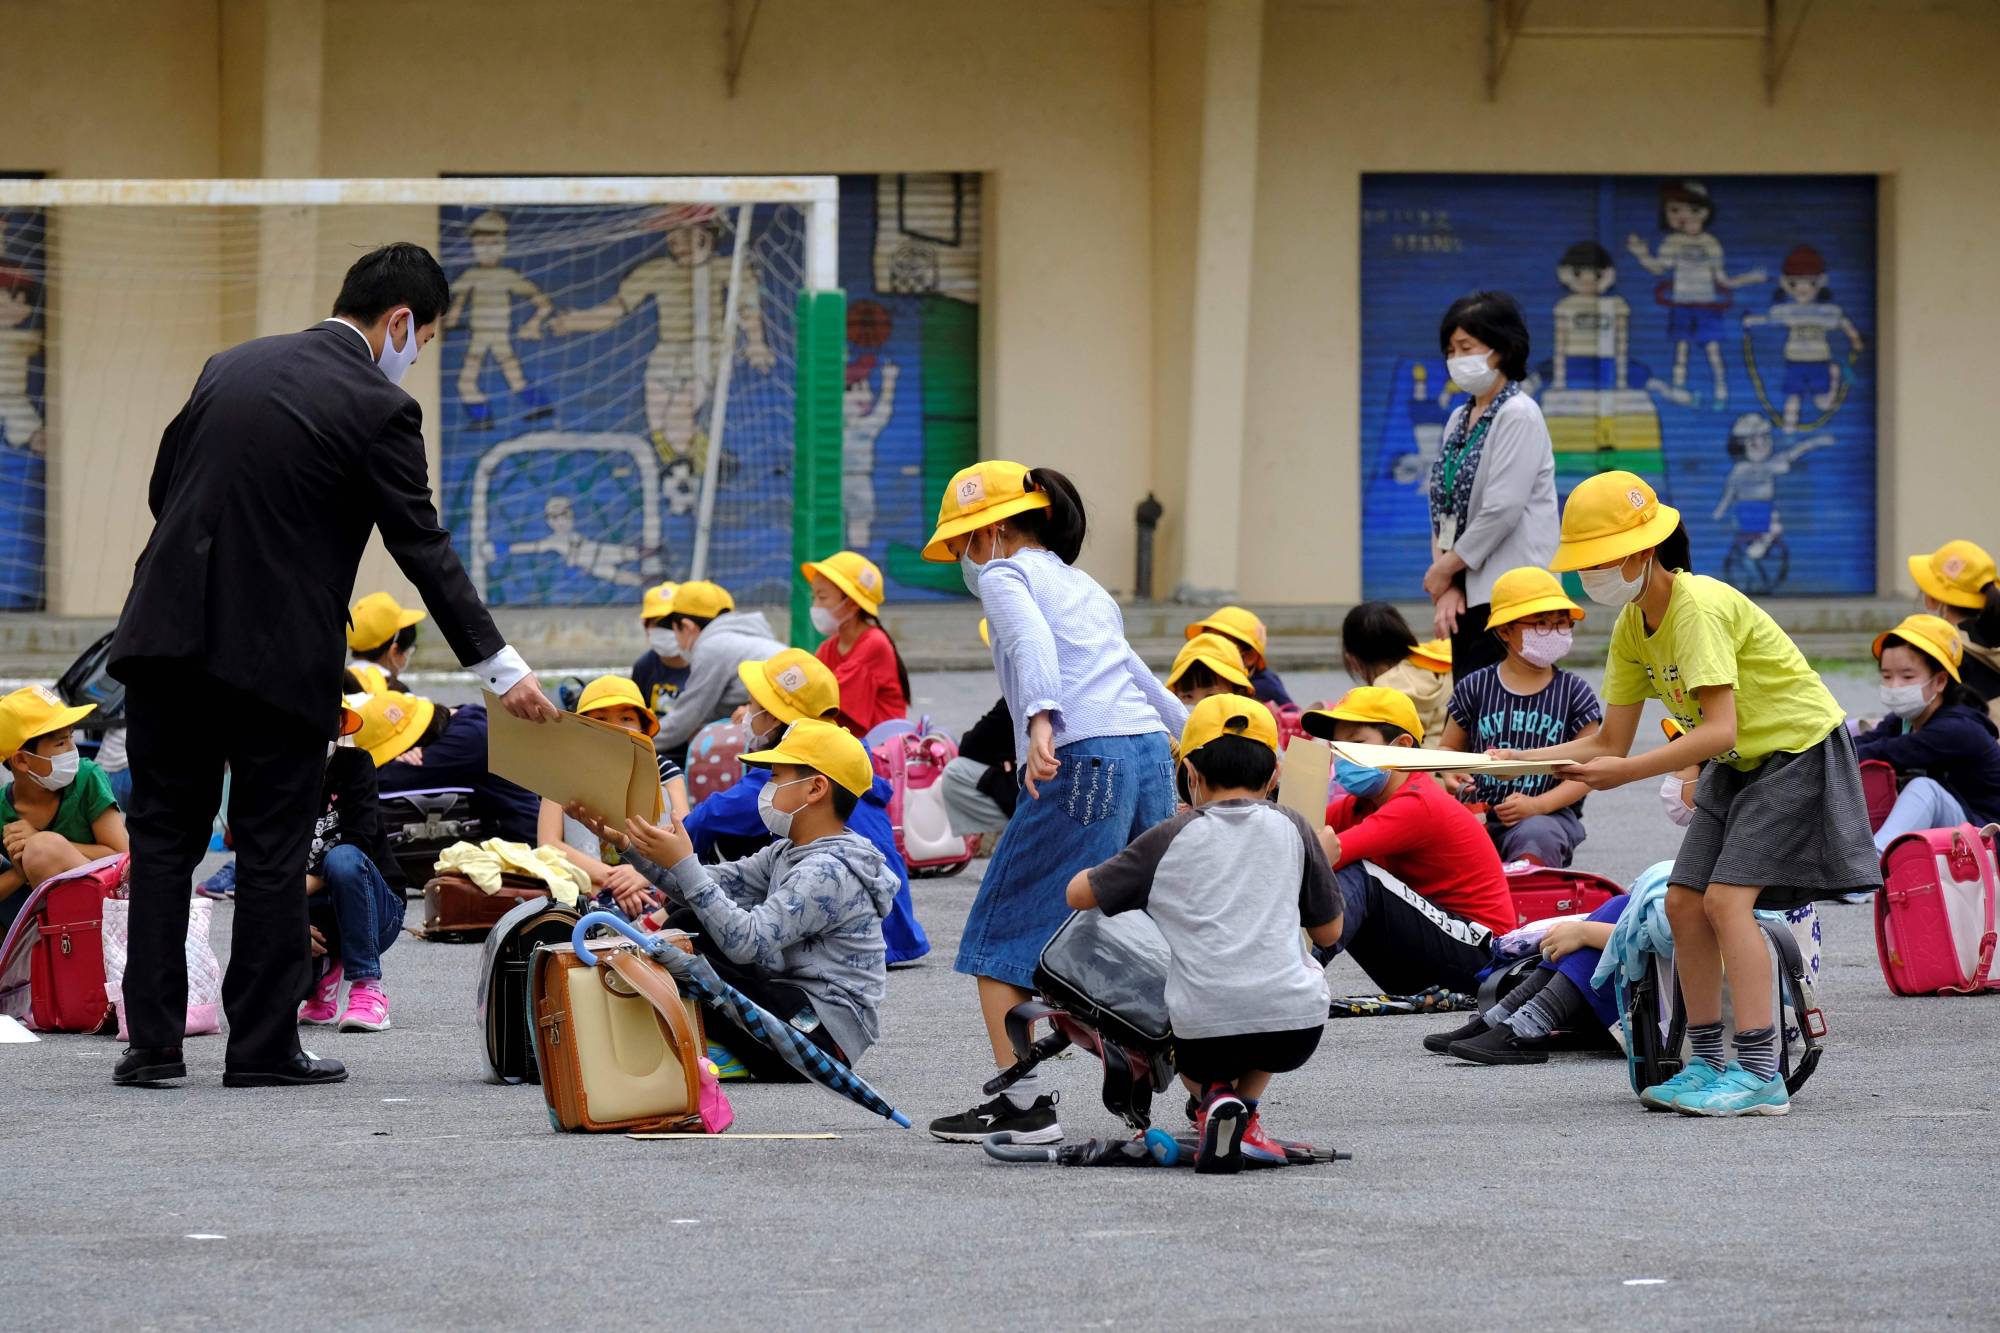 Elementary school students gather for a class in a schoolyard at a reopened school in Tokyo on Monday, a week after the government lifted the state of emergency nationwide. | AFP-JIJI